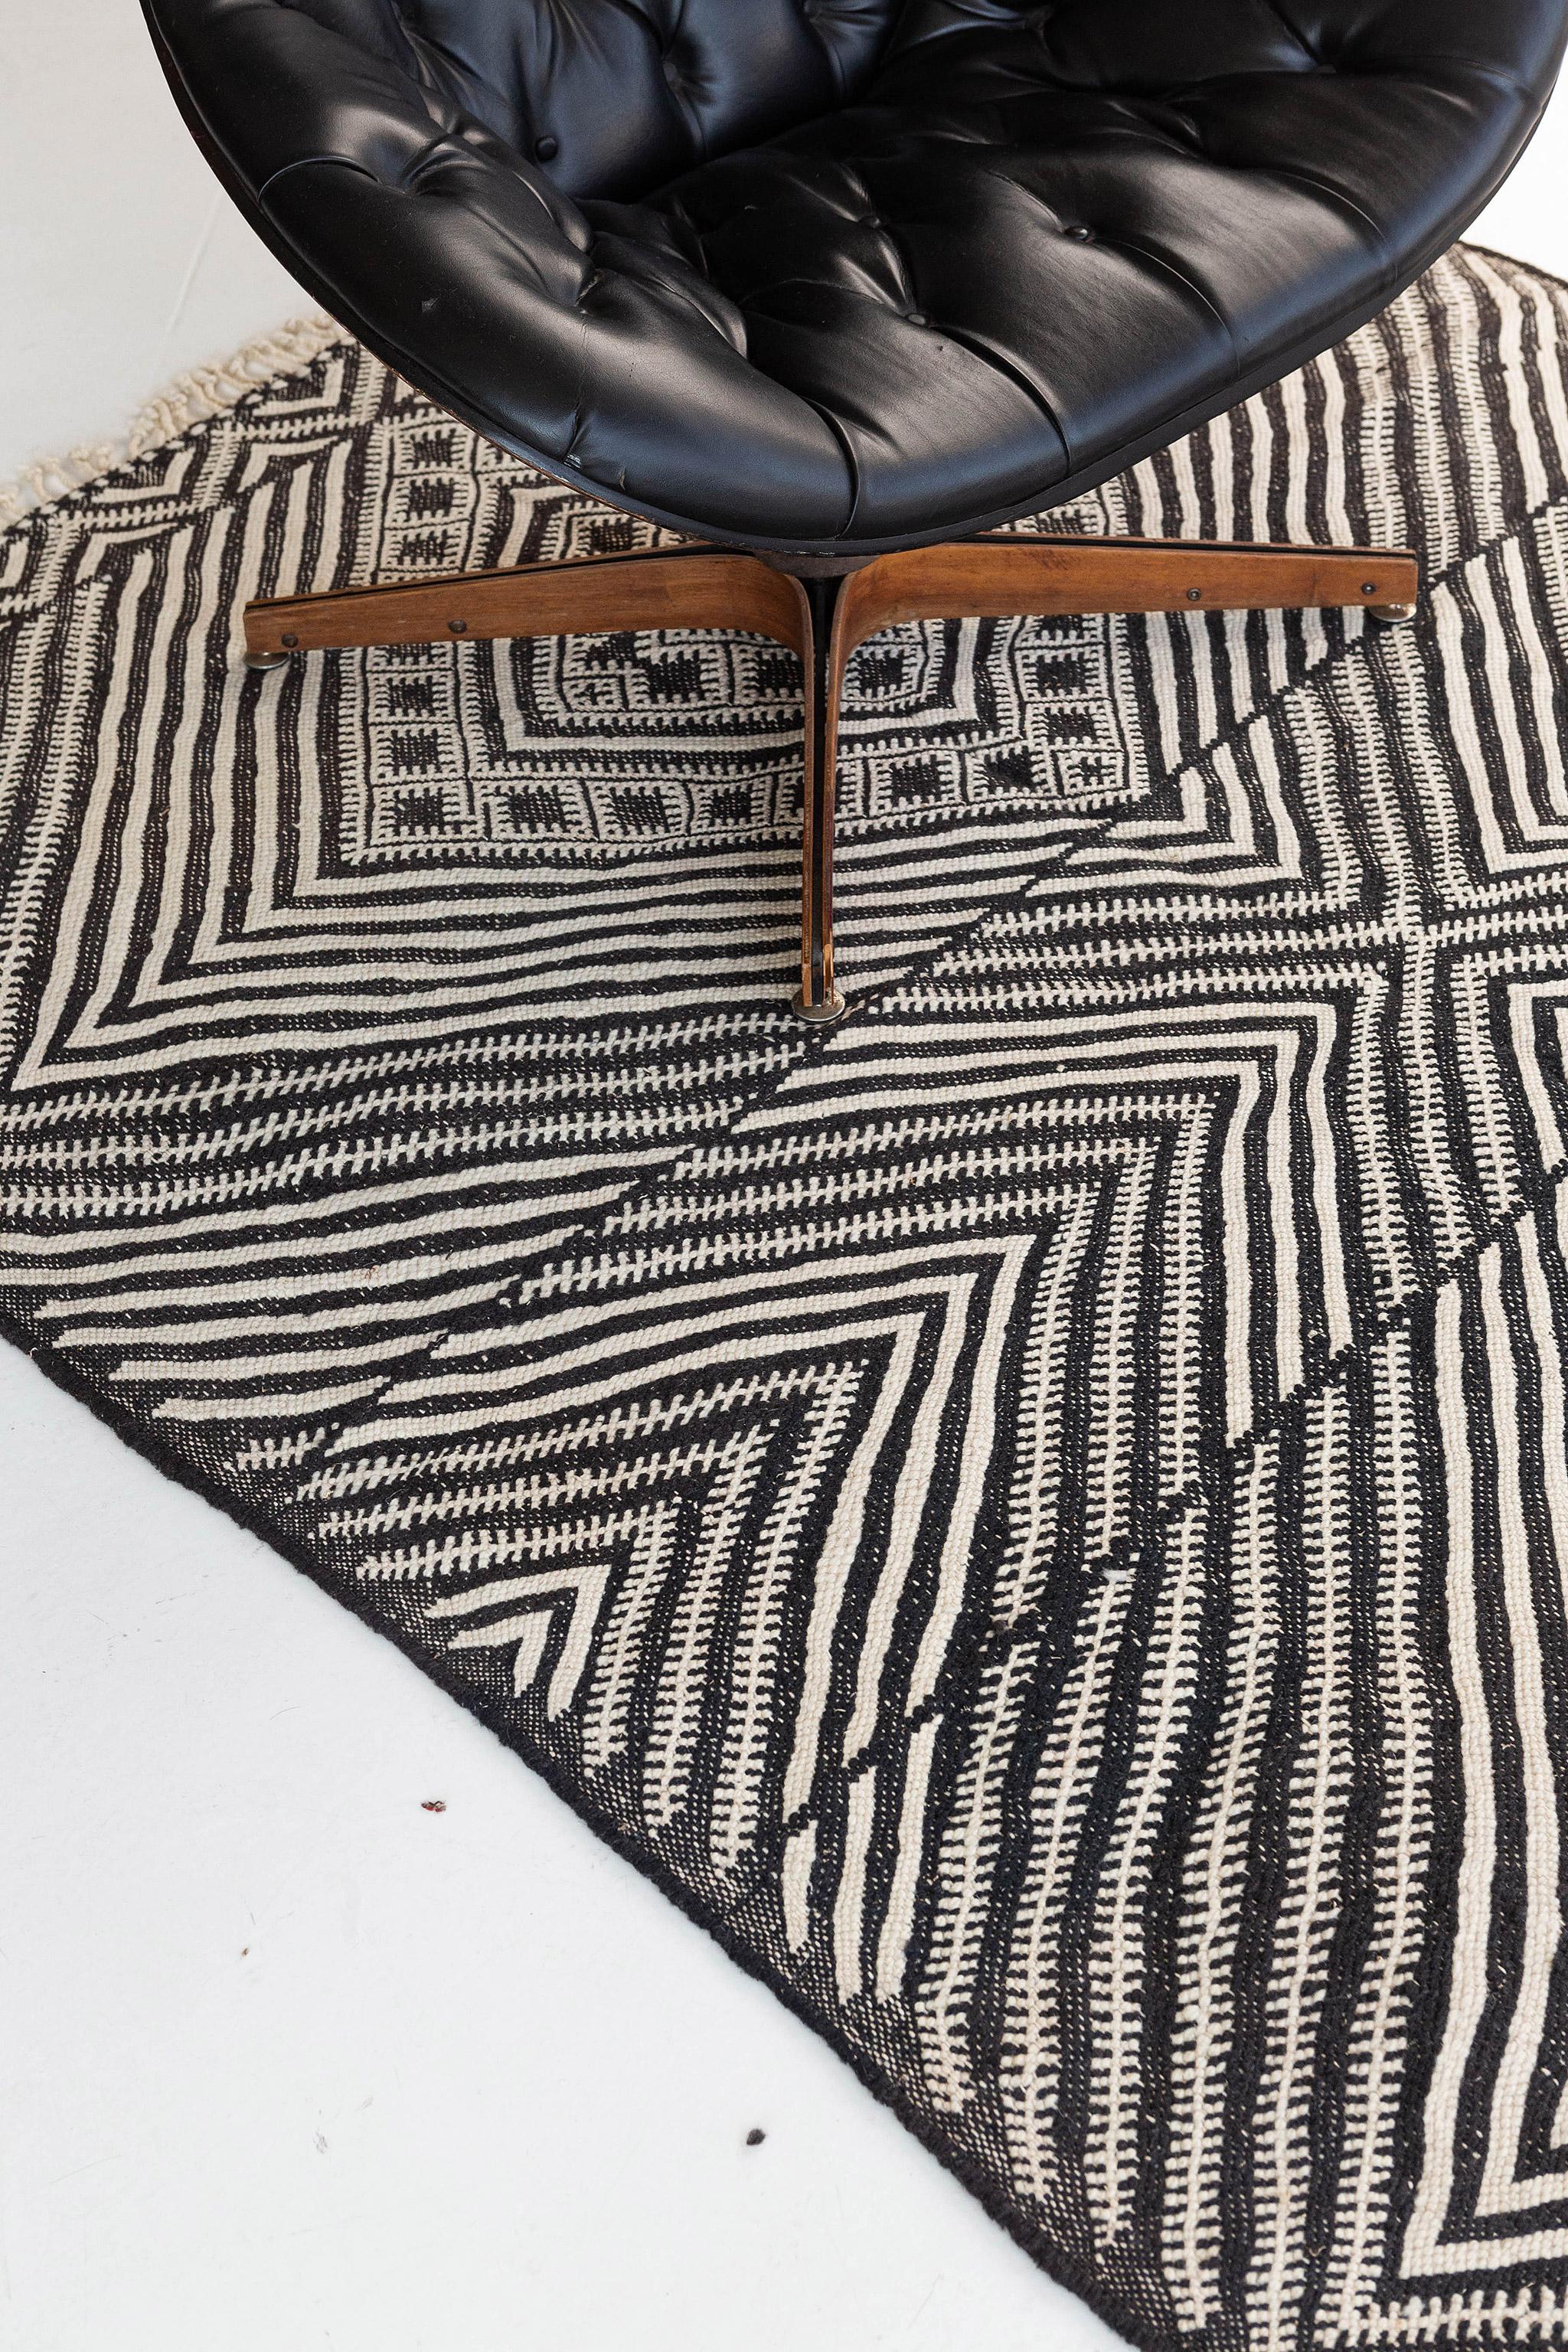 Featuring a stunning effect creating a lozenge scheme, this Moroccan Kilim rug adds texture and subtle graphic appeal forming a warm, relaxed space. The abrashed field is covered in an all-over diamond effect partridge eyes across the tantalizing